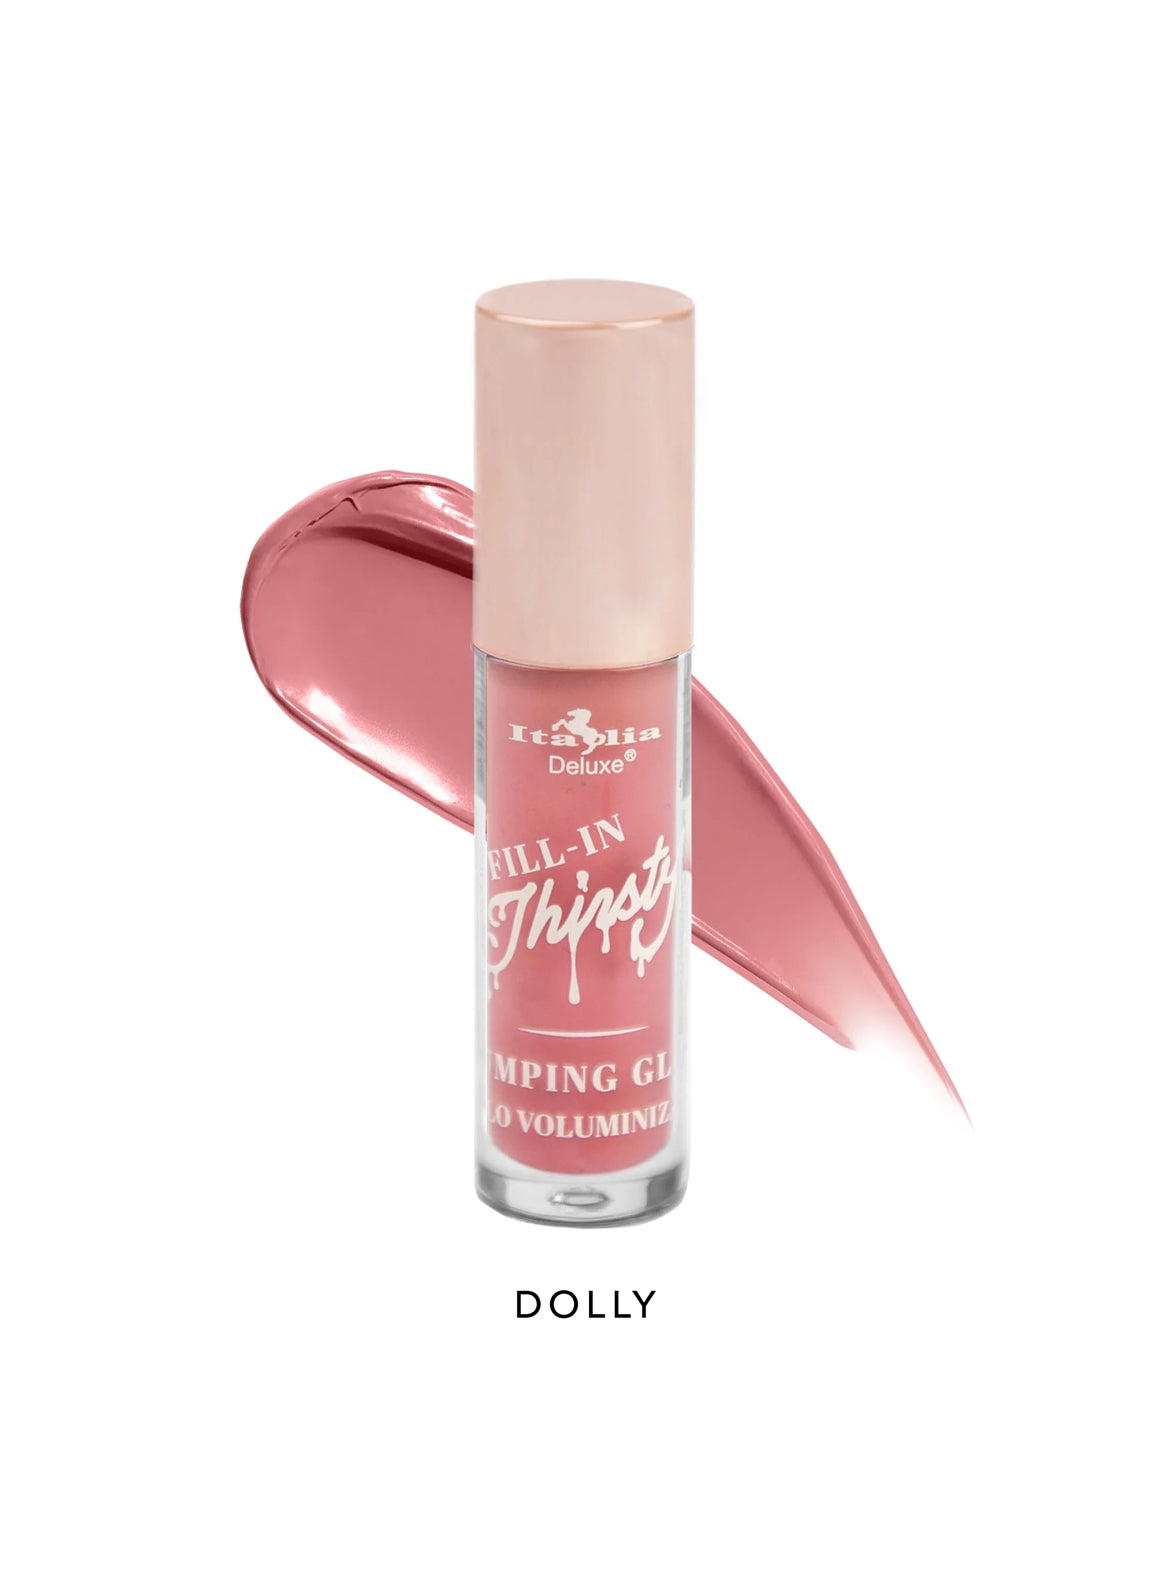 Fill-In Thirsty Pout Colored Plumping Gloss